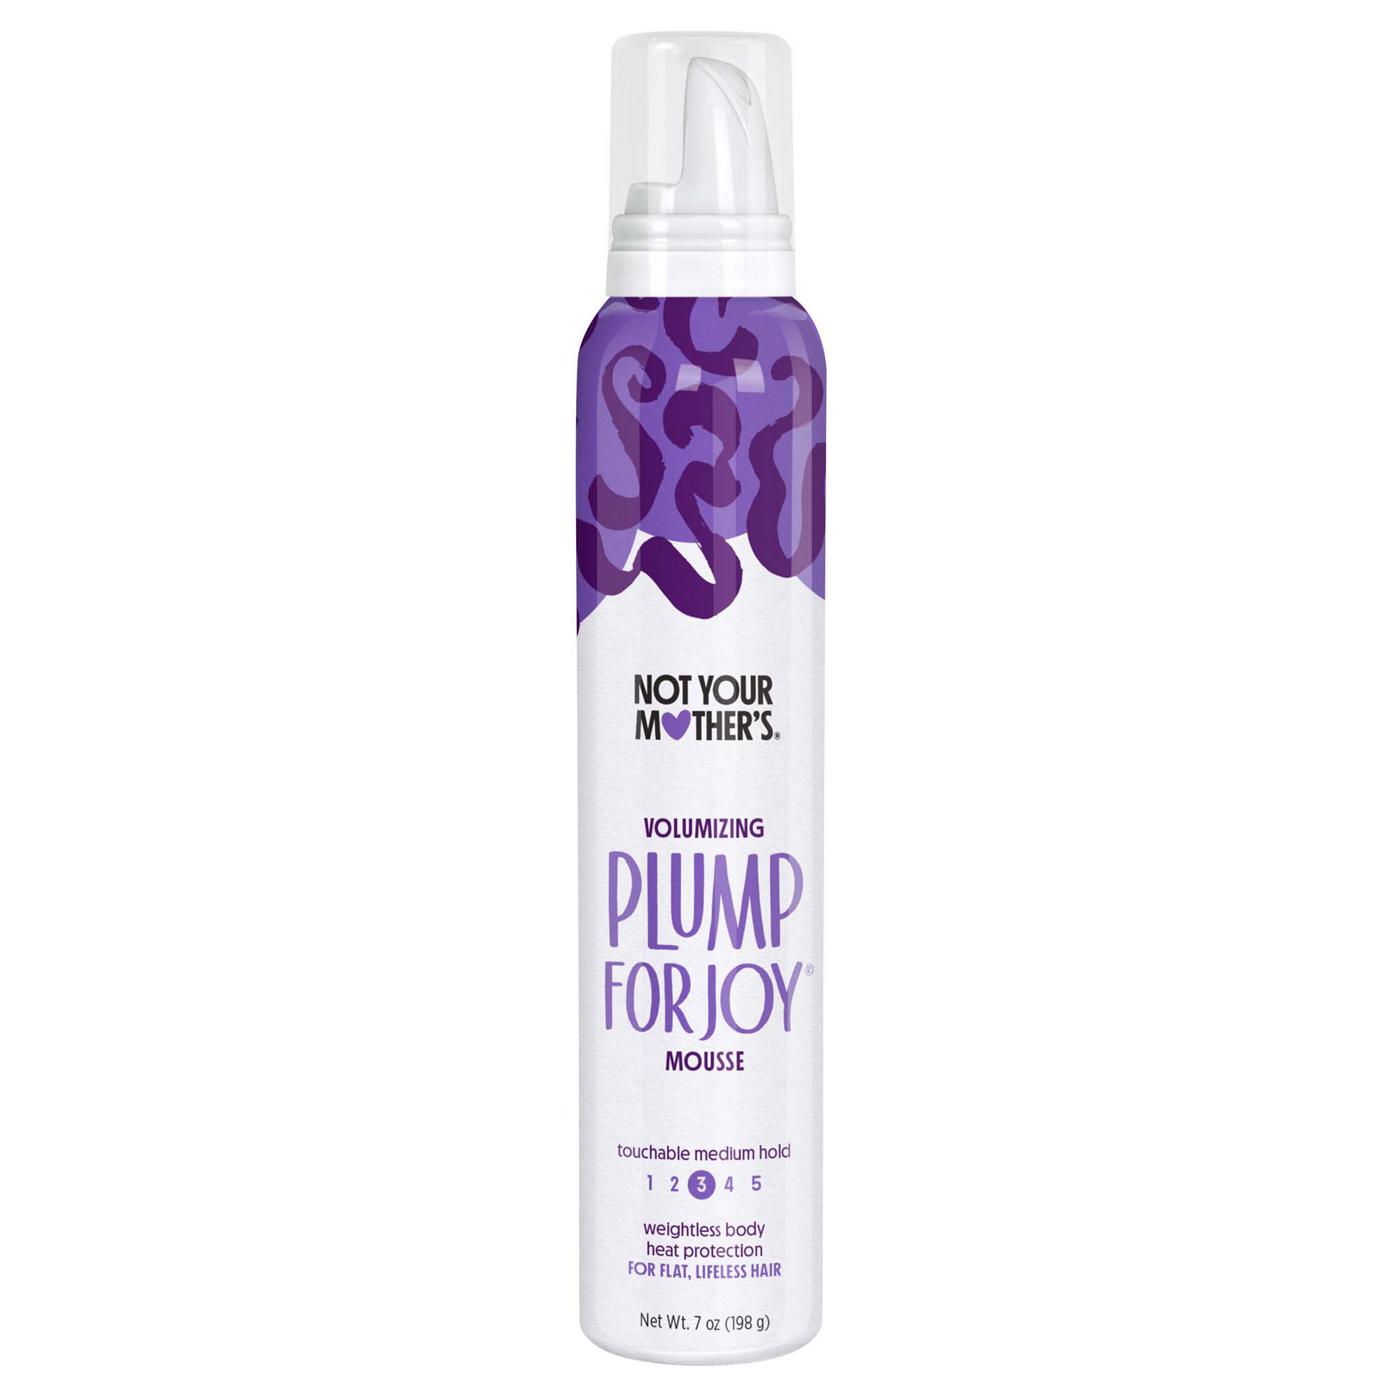 Not Your Mother's Volumizing  Plump For Joy Mousse; image 1 of 2